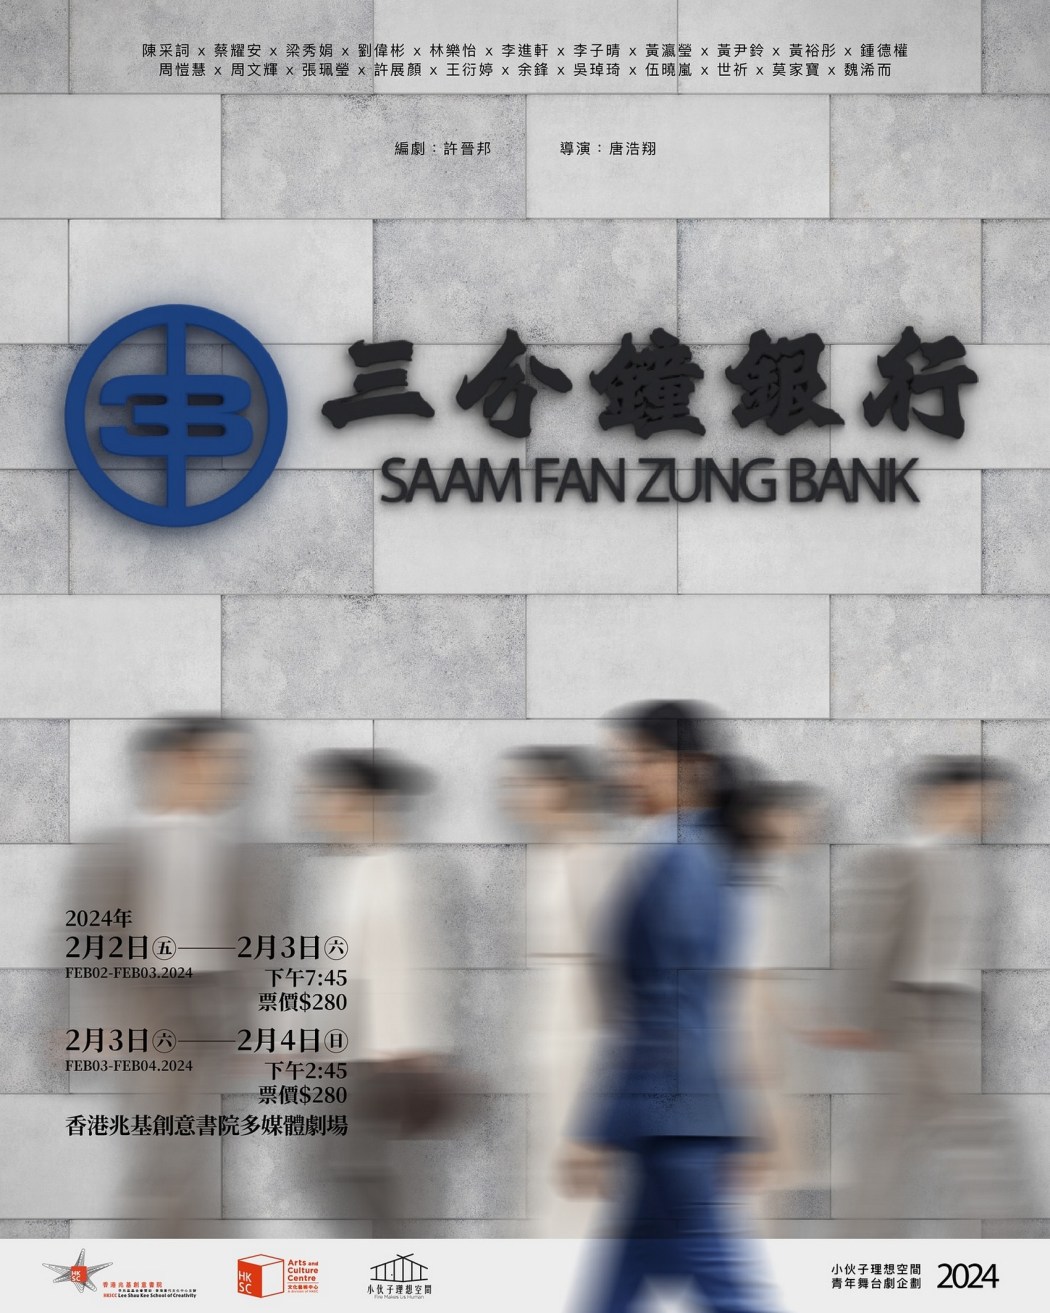 Poster of Saam Fan Zung Bank. Photo: Fire Makes Us Human.